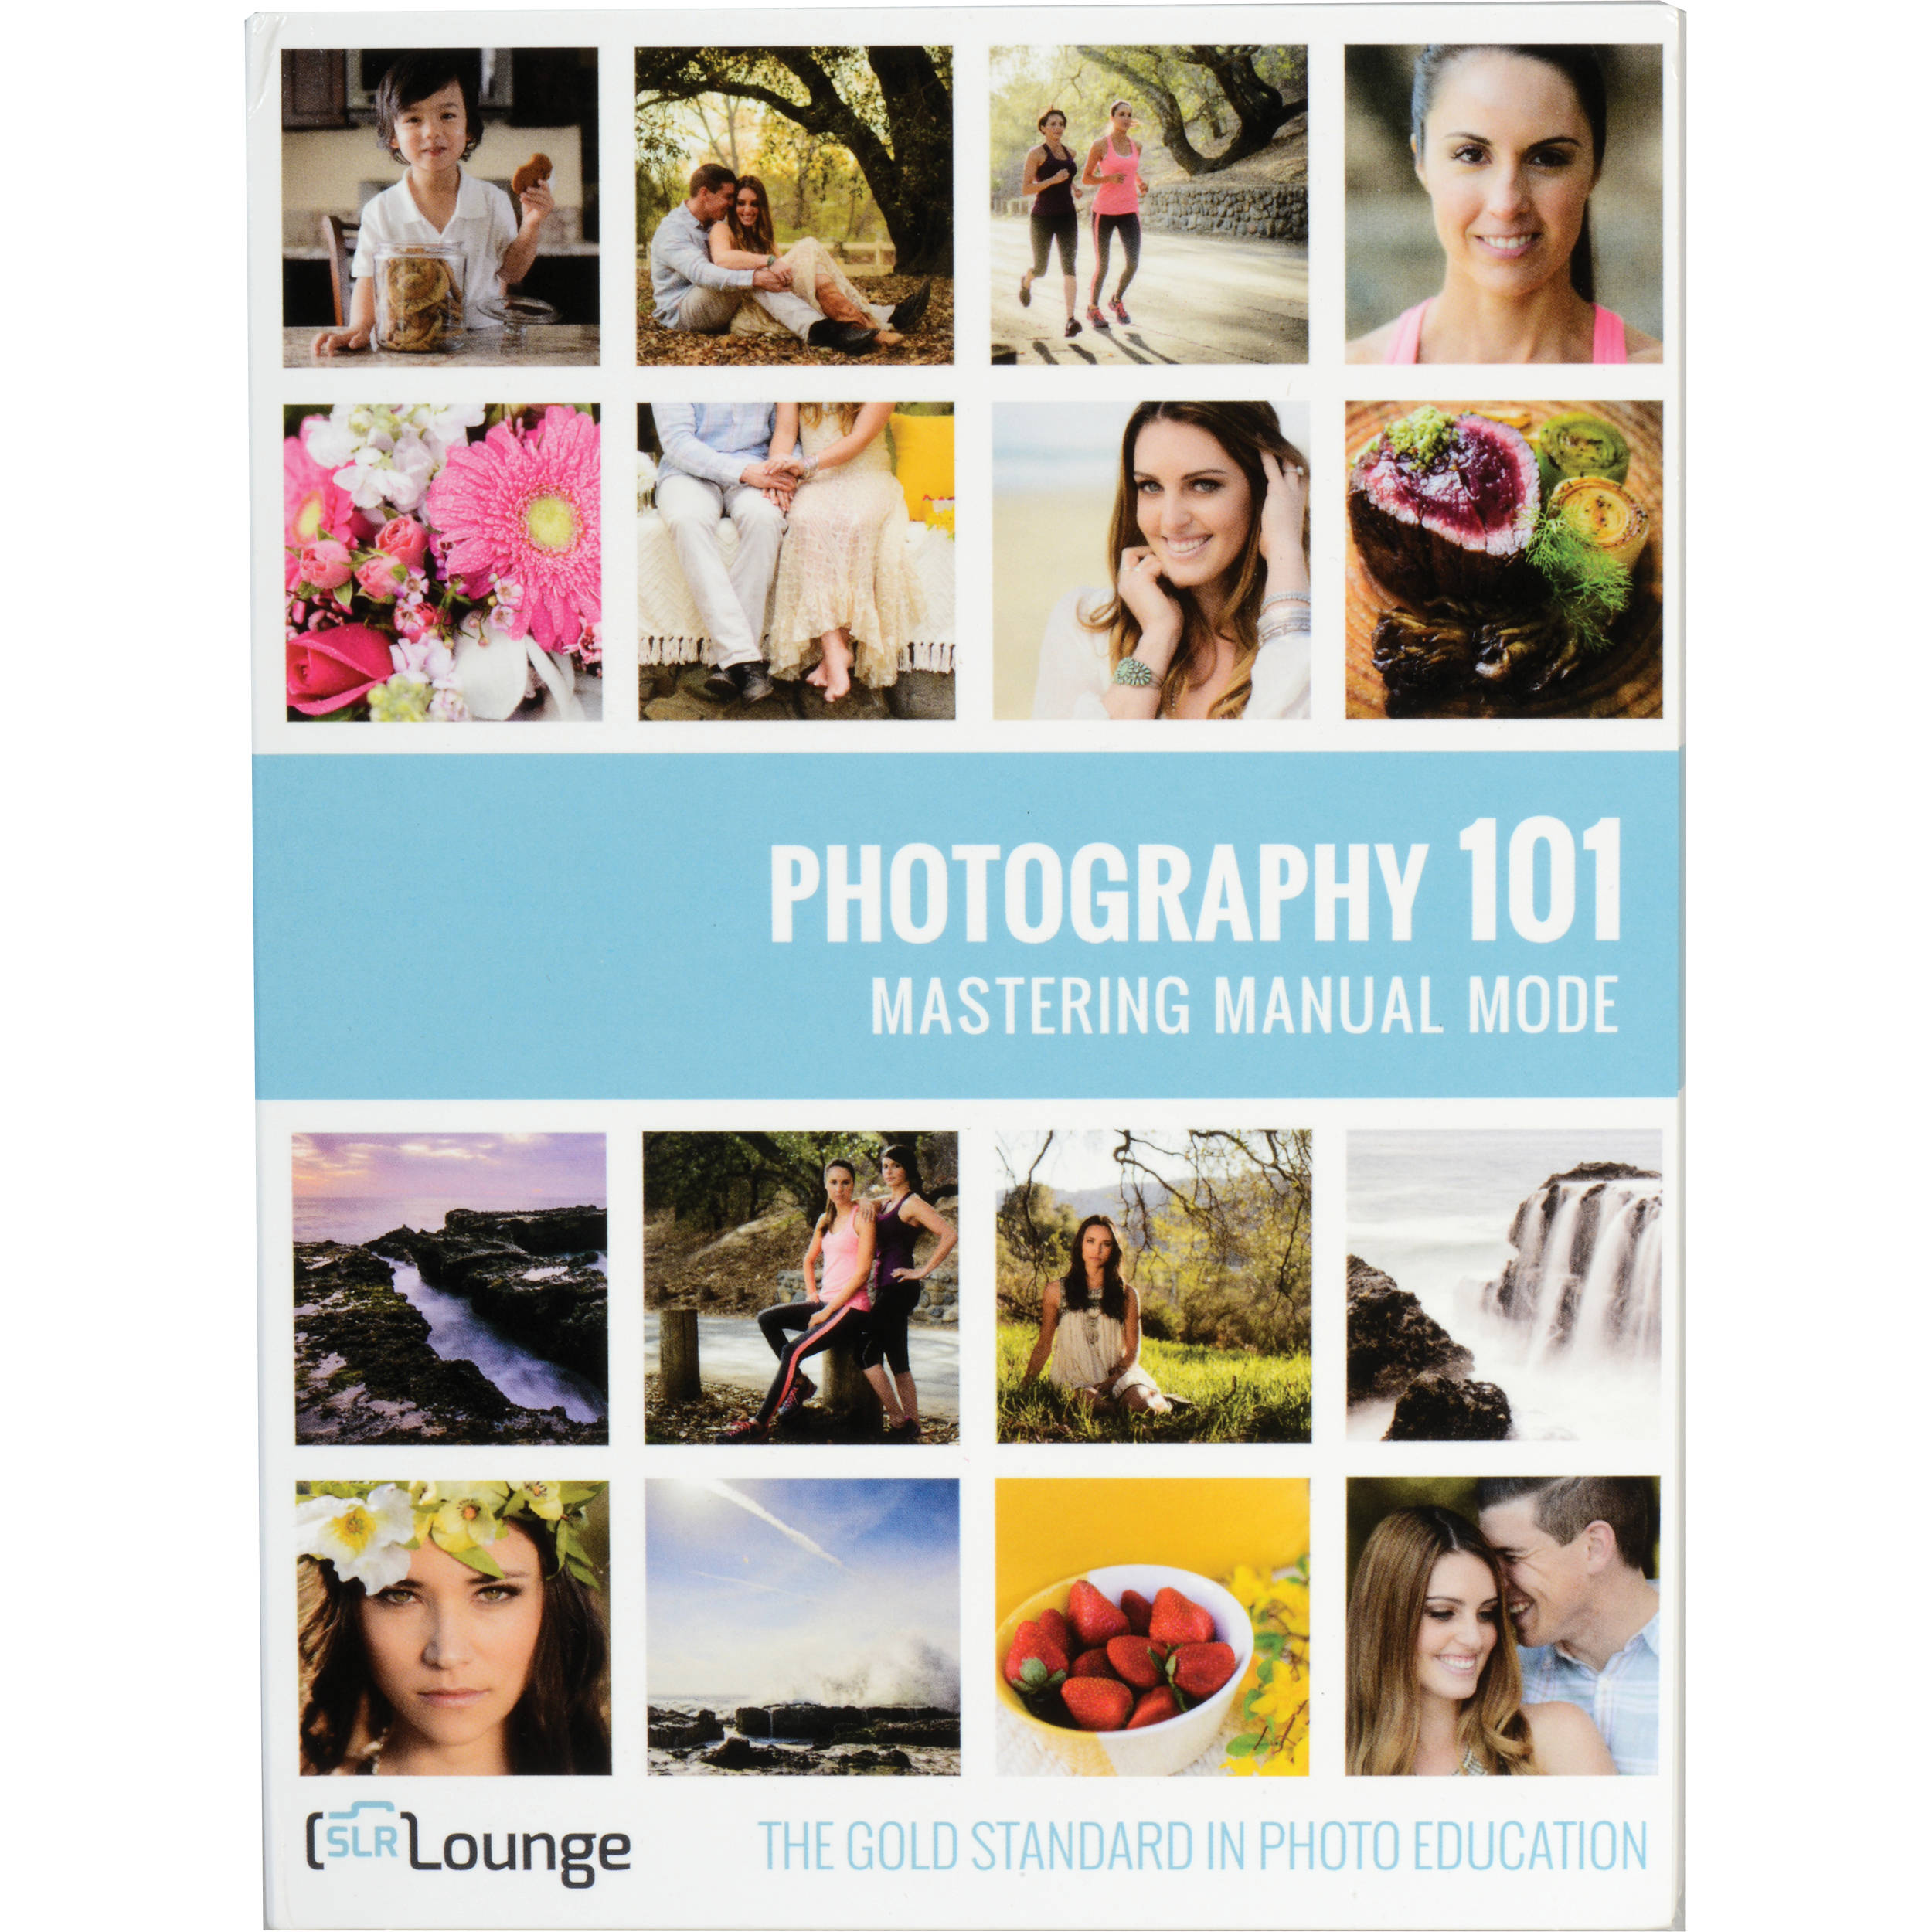 Photography 101 by SLR Lounge